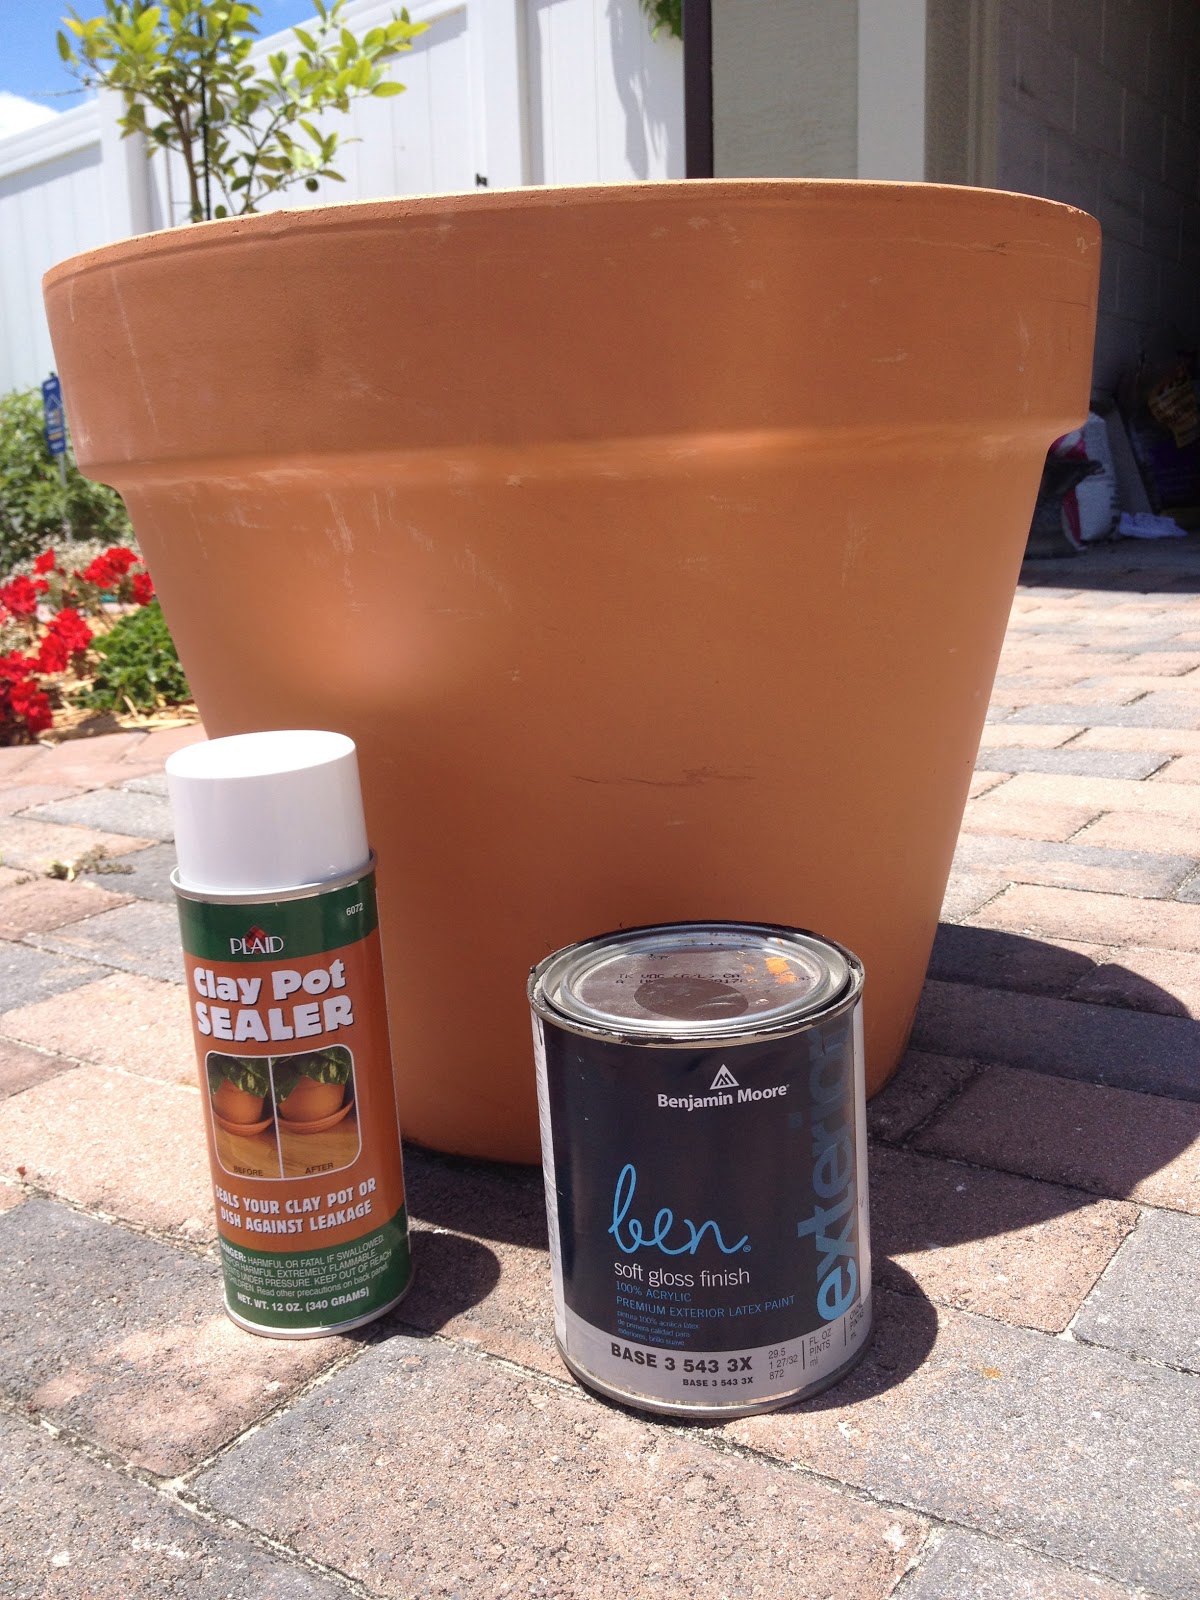  Painting Clay Pots  Easy DIY Cheap Pots  the Way You Want 